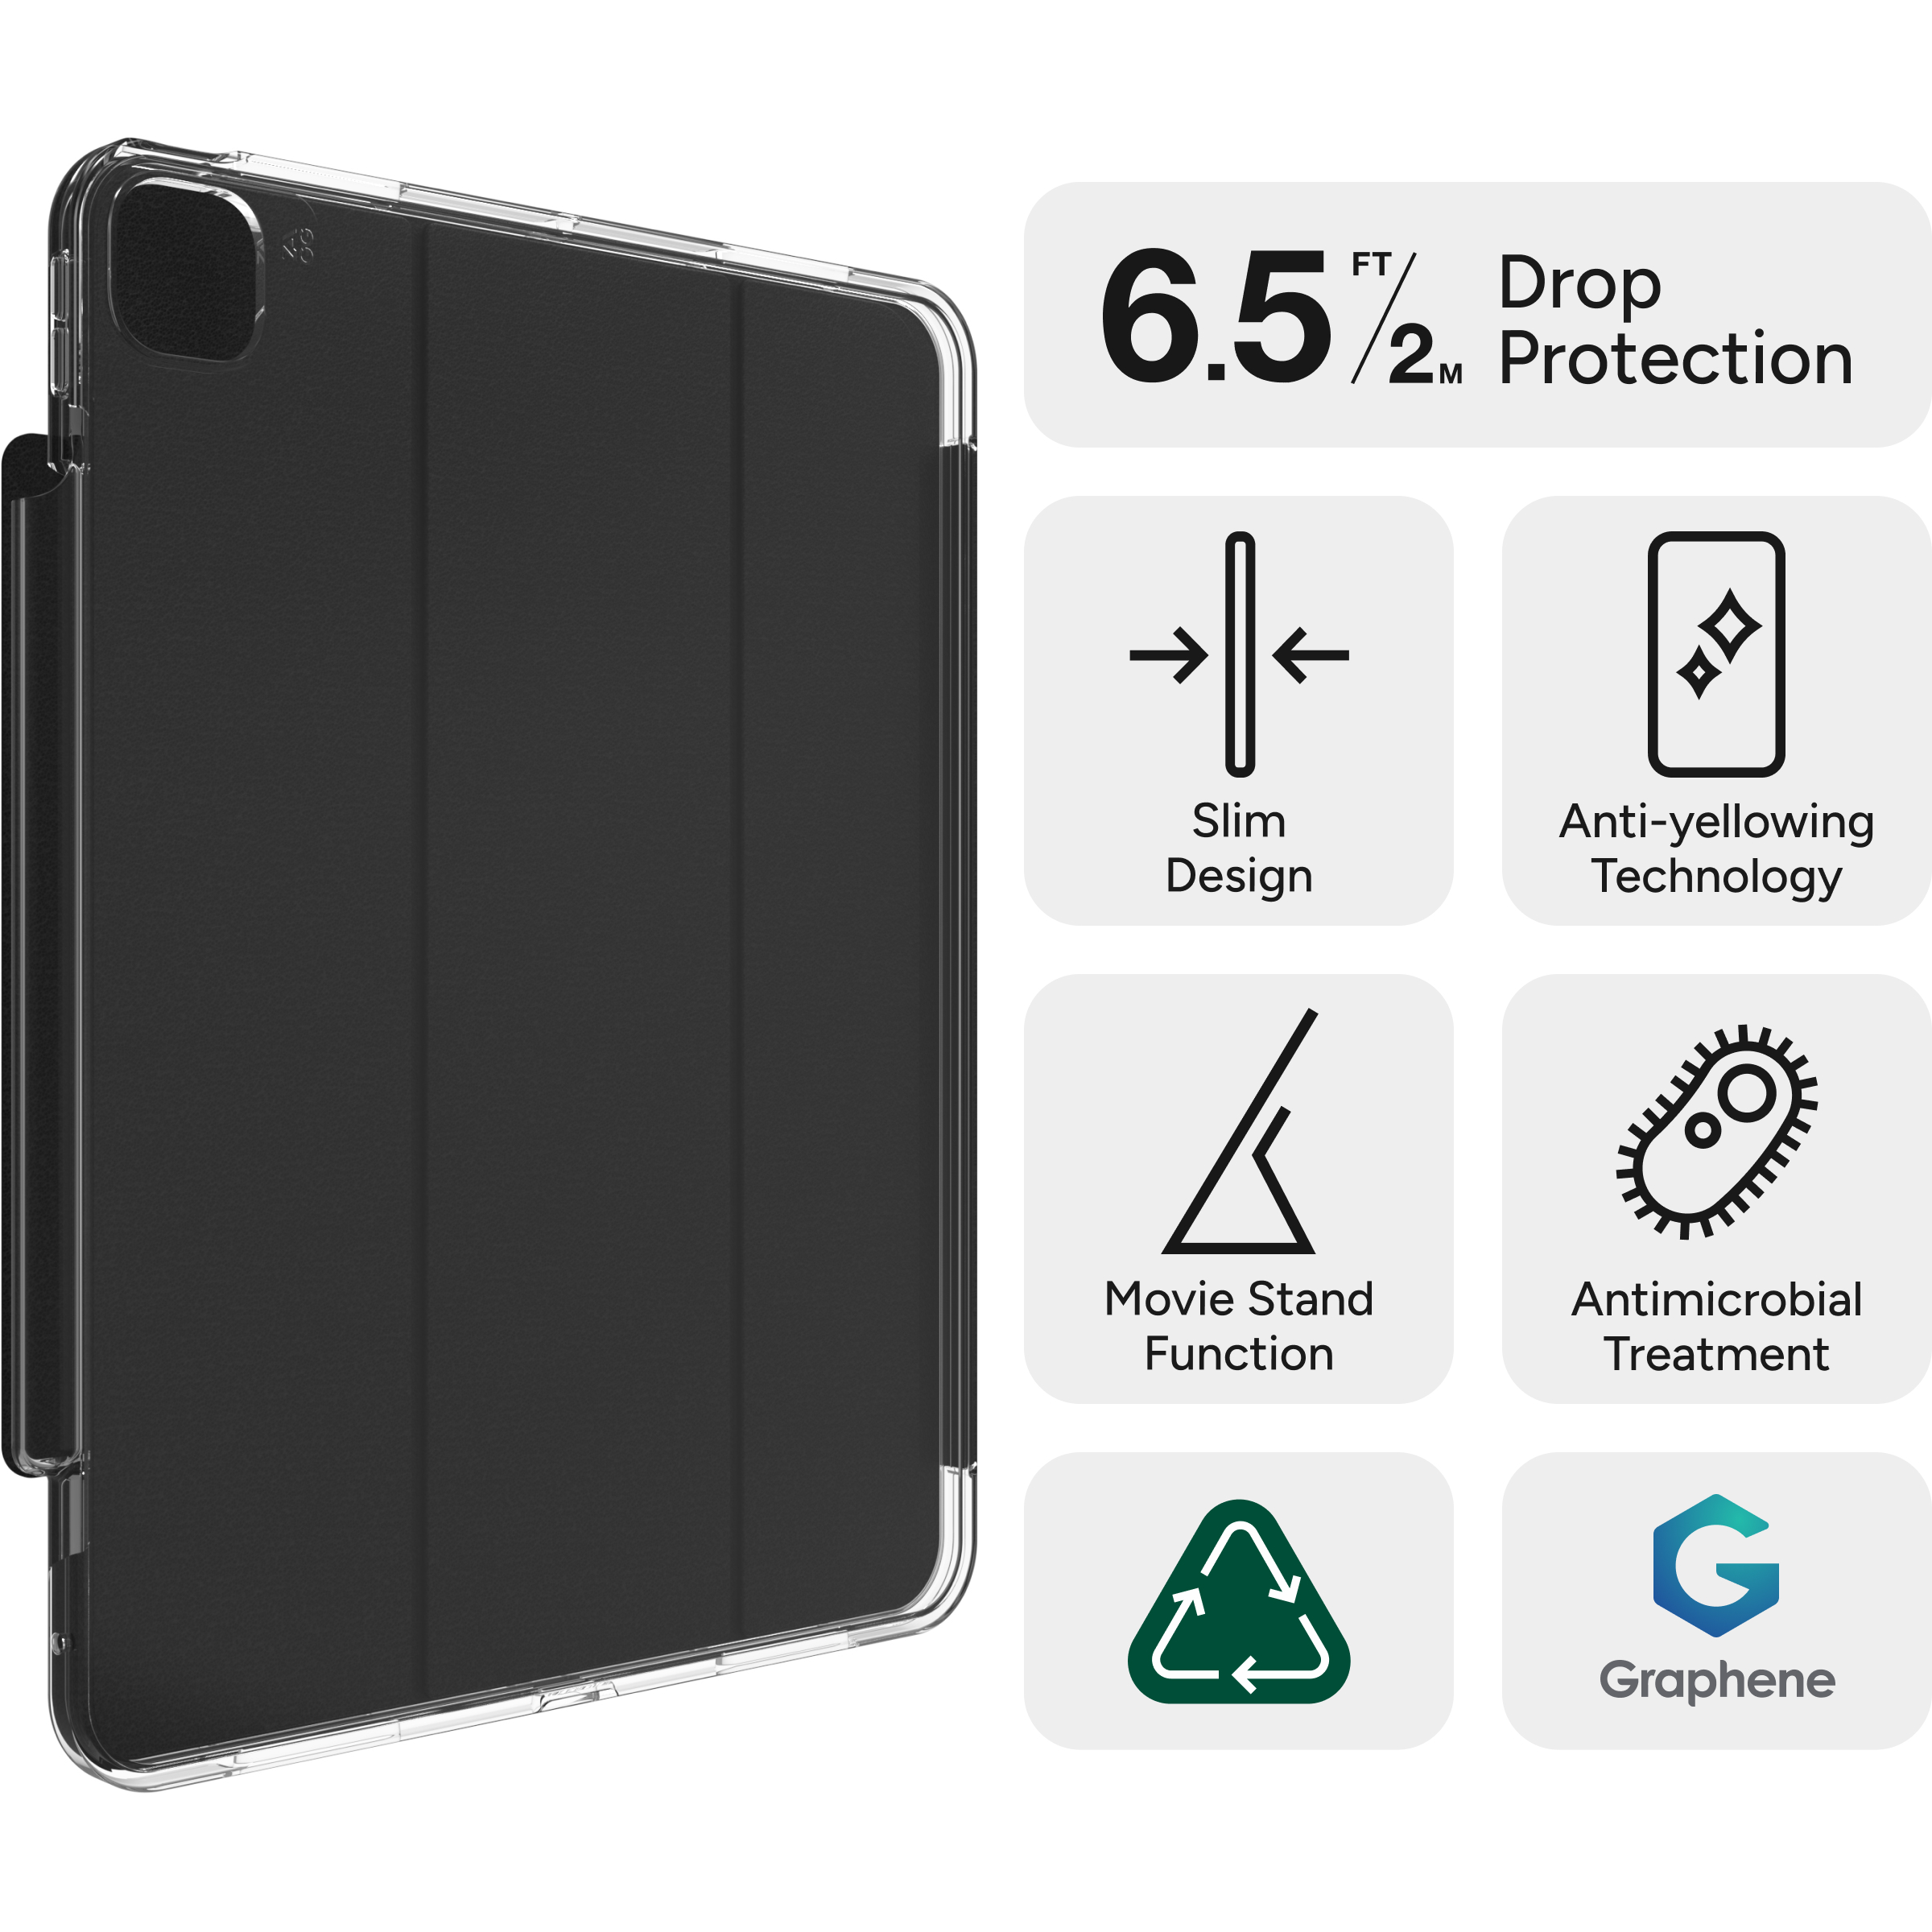 Drop Resistant up to 6.5 ft ǀ 2m||
 Crystal Palace with Folio protects your phone from drops up to 6.5 feet (2 meters).